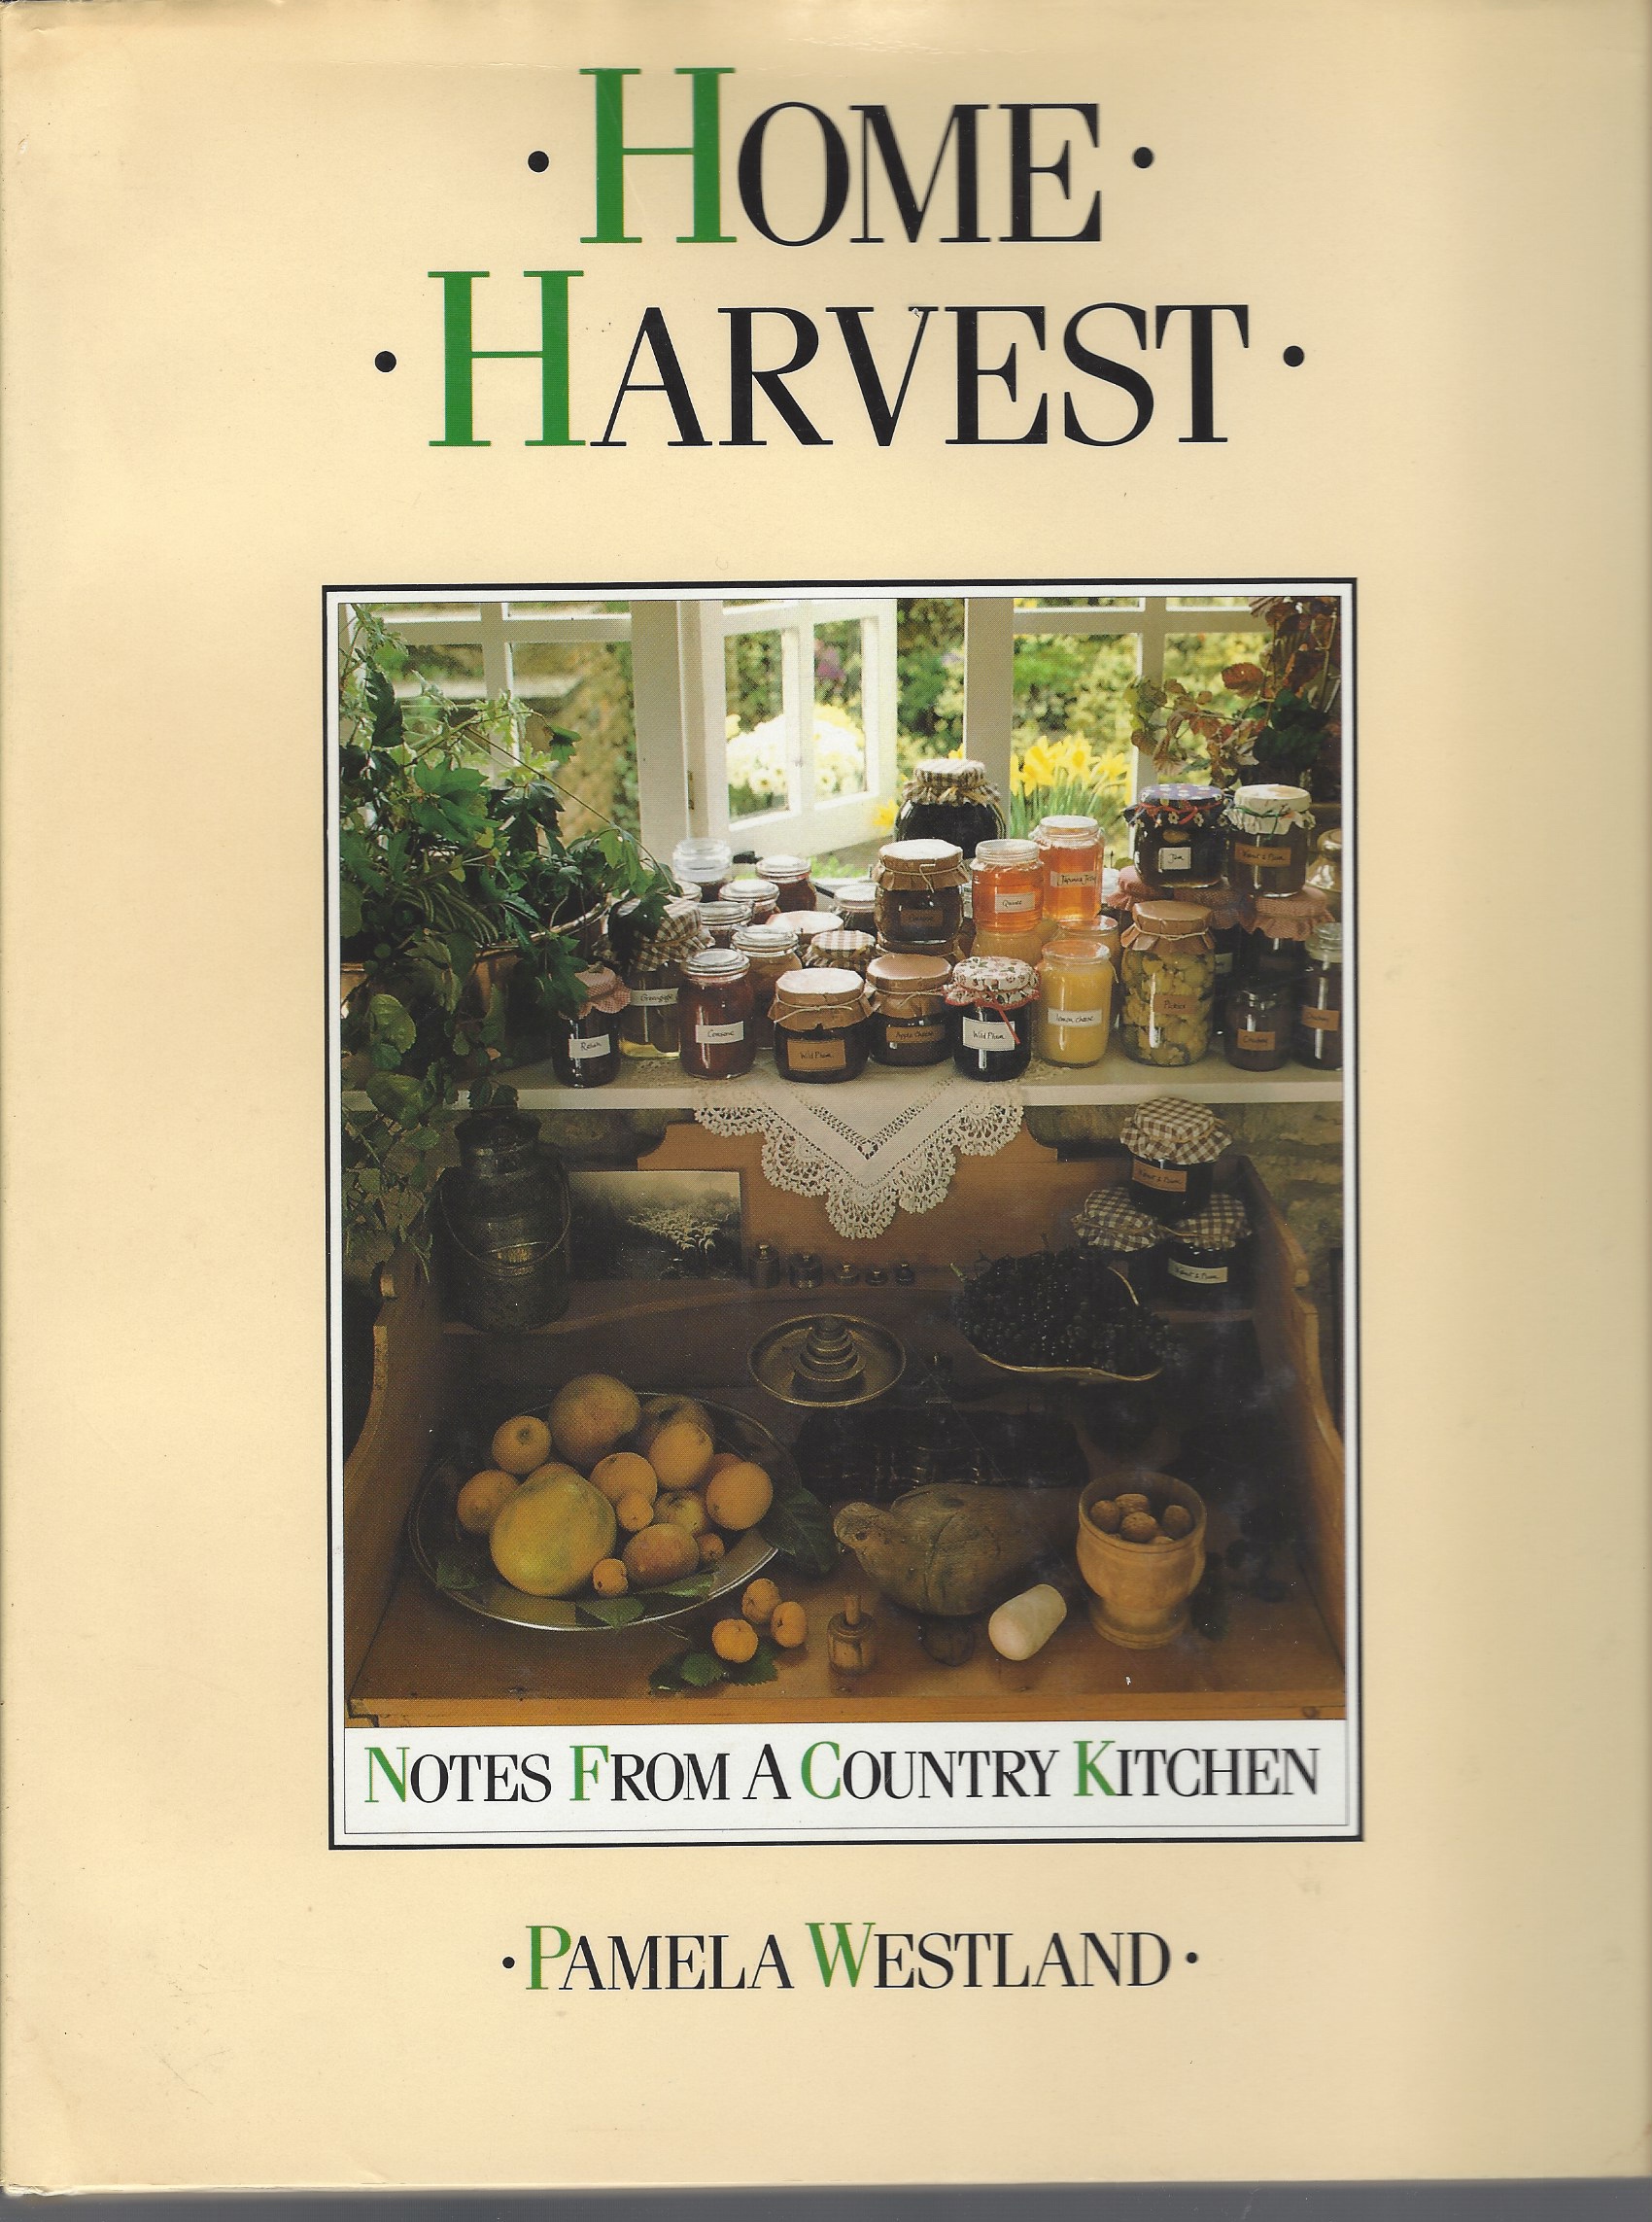 WESTLAND PAMELA - Home Harvest Notes from a Country Kitchen